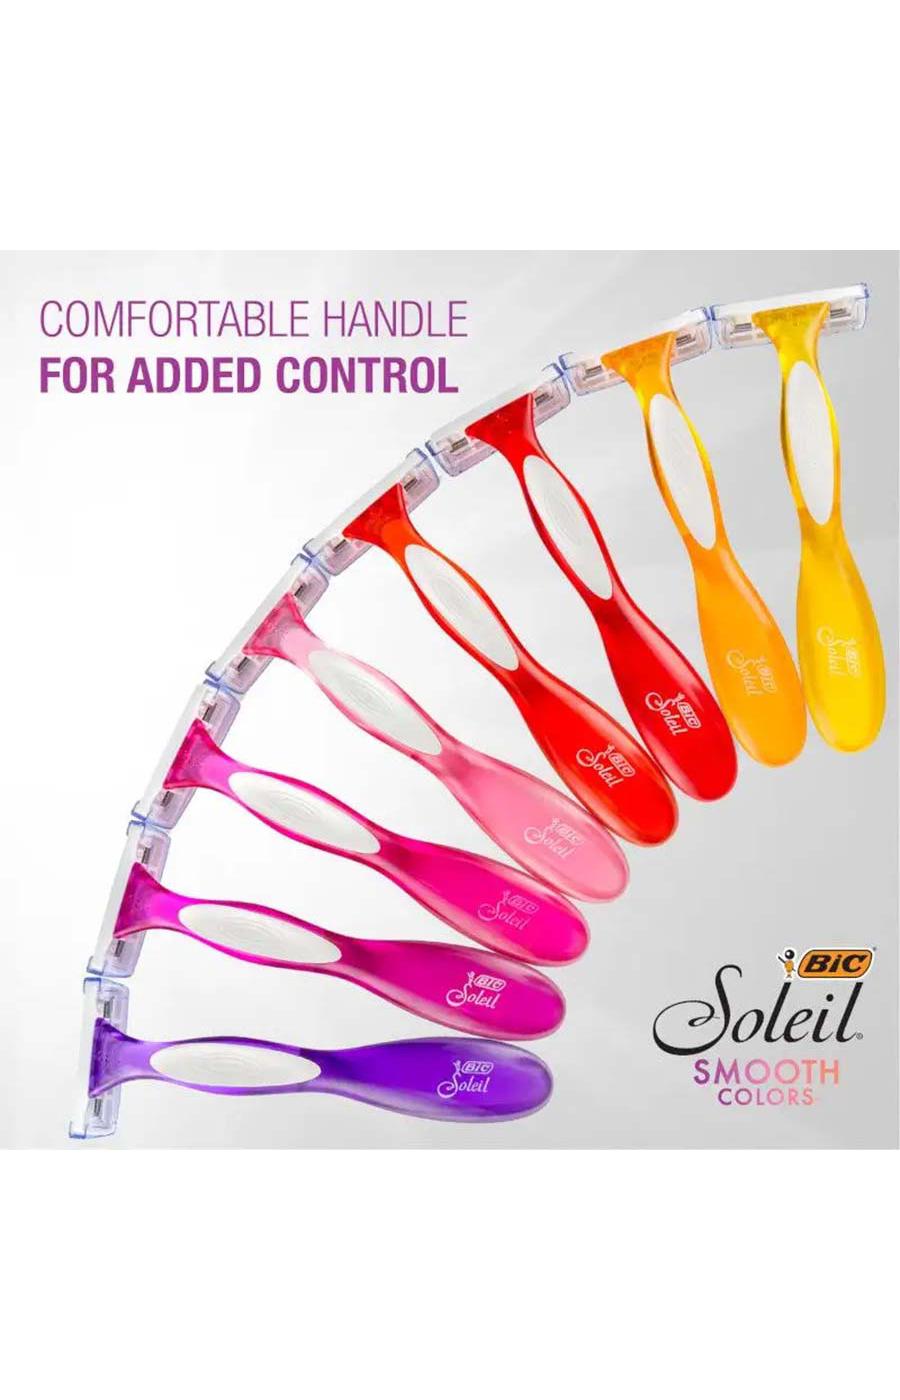 BIC Soleil Smooth 3 Blades Disposable Razors; image 4 of 4